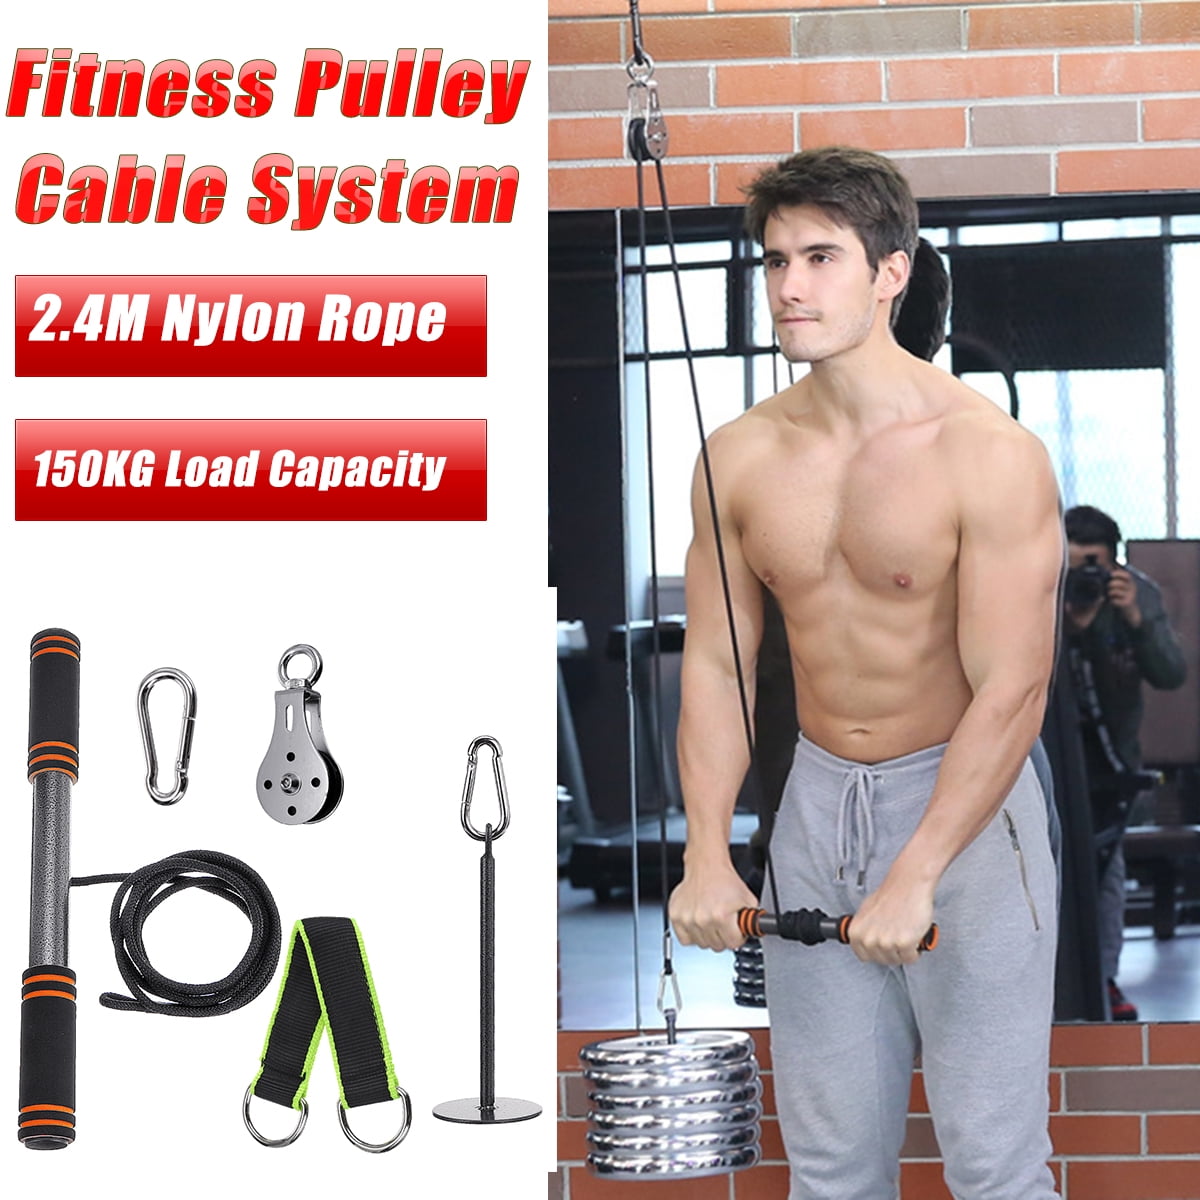 Adjustable Pulley Cable Machine EYCI Fitness LAT and Lift Pulley System